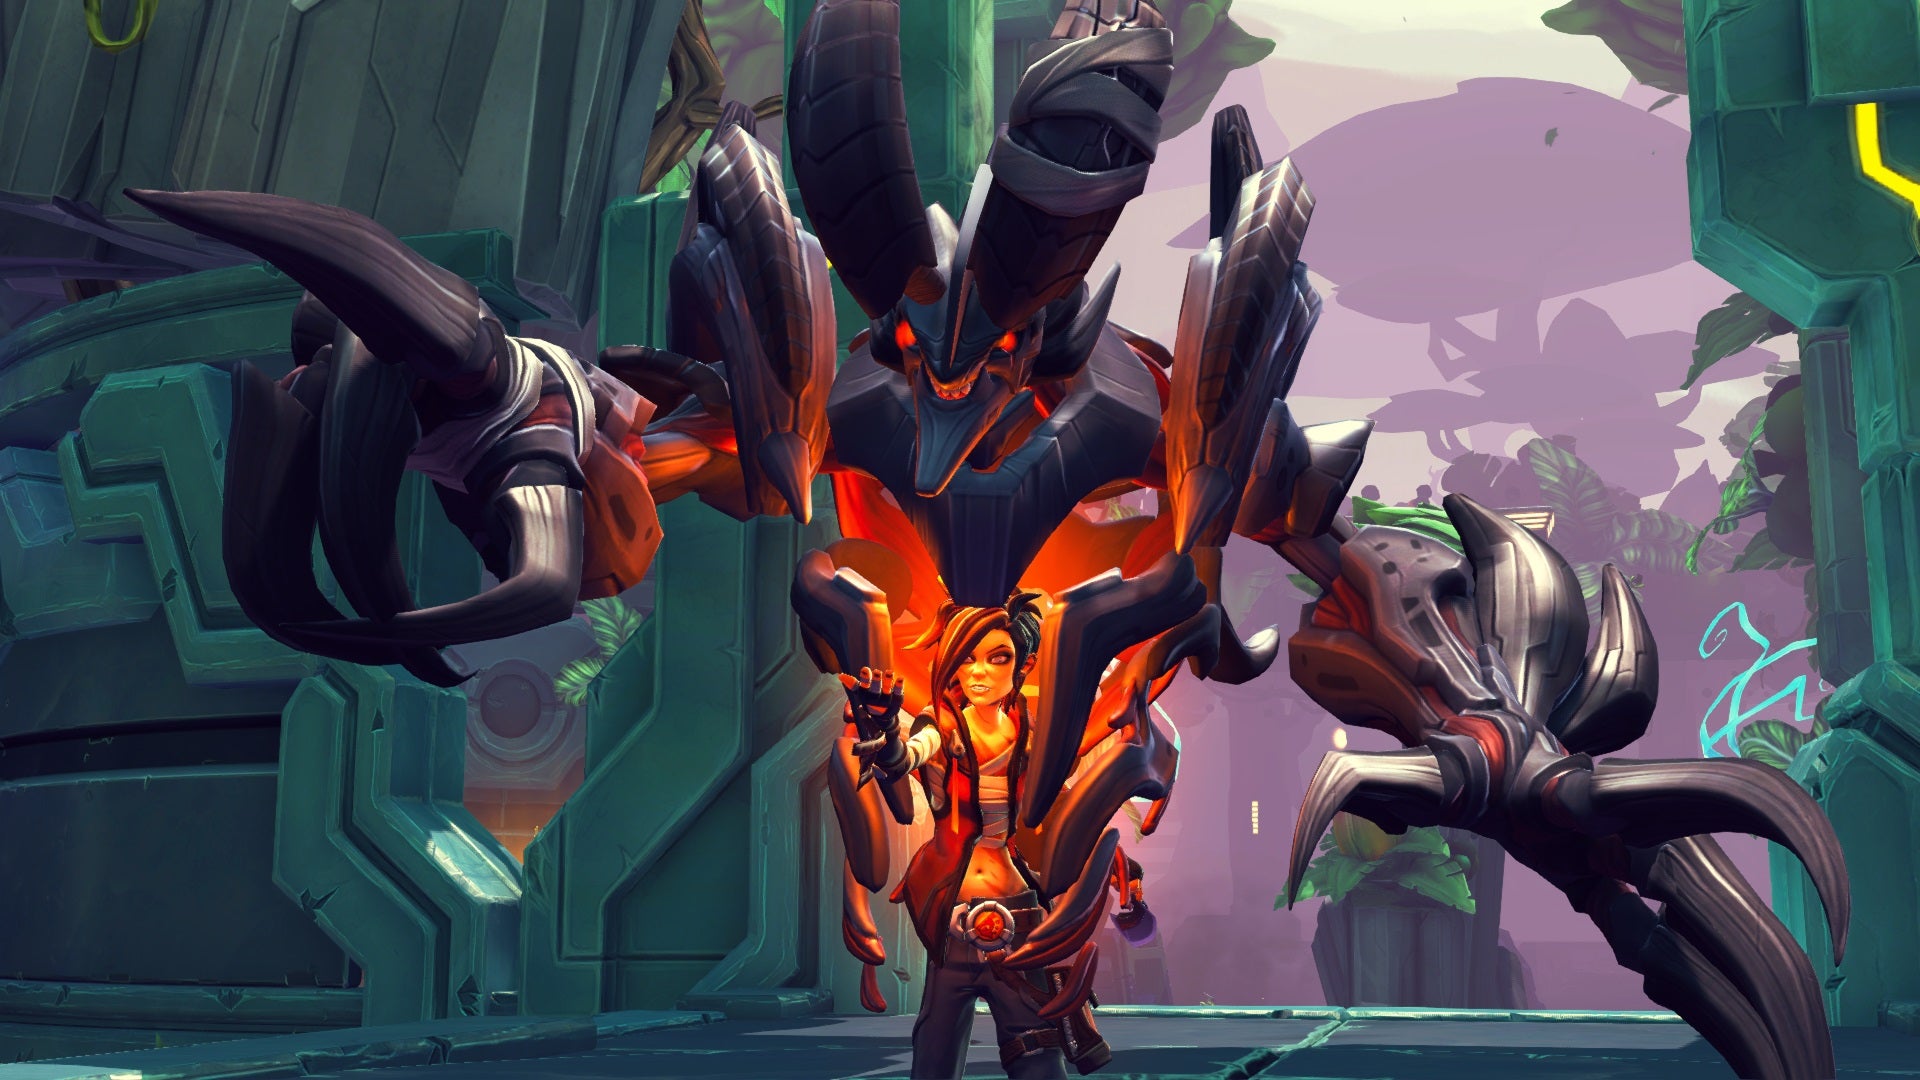 Image for Have a look at Battleborn's Incursion Mode in action